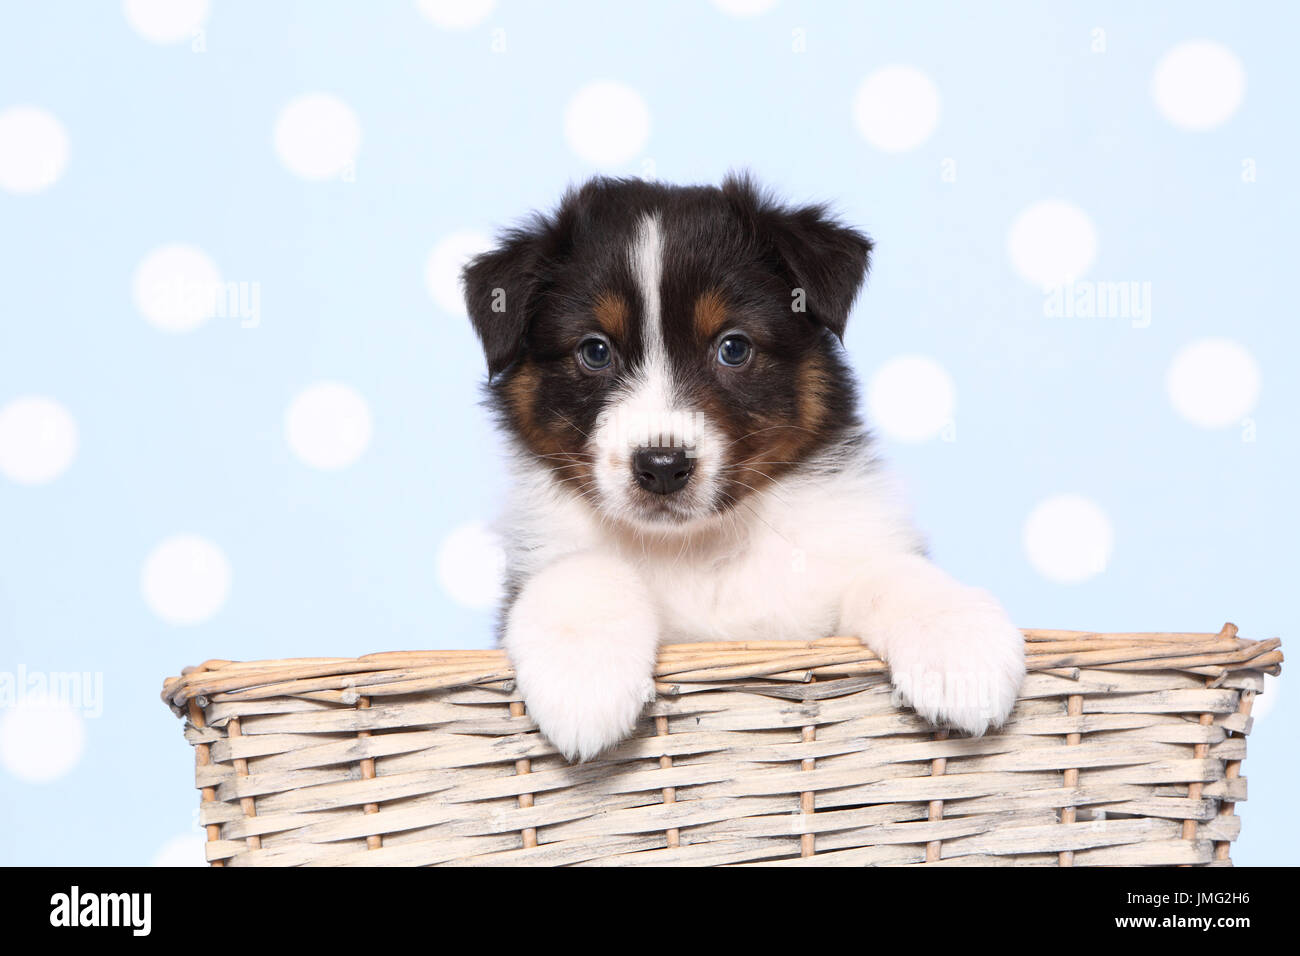 Australian Shepherd. Puppy (6 weeks old) sitting in a wicker basket. Studio picture against a blue background with white polka dots. Germany Stock Photo